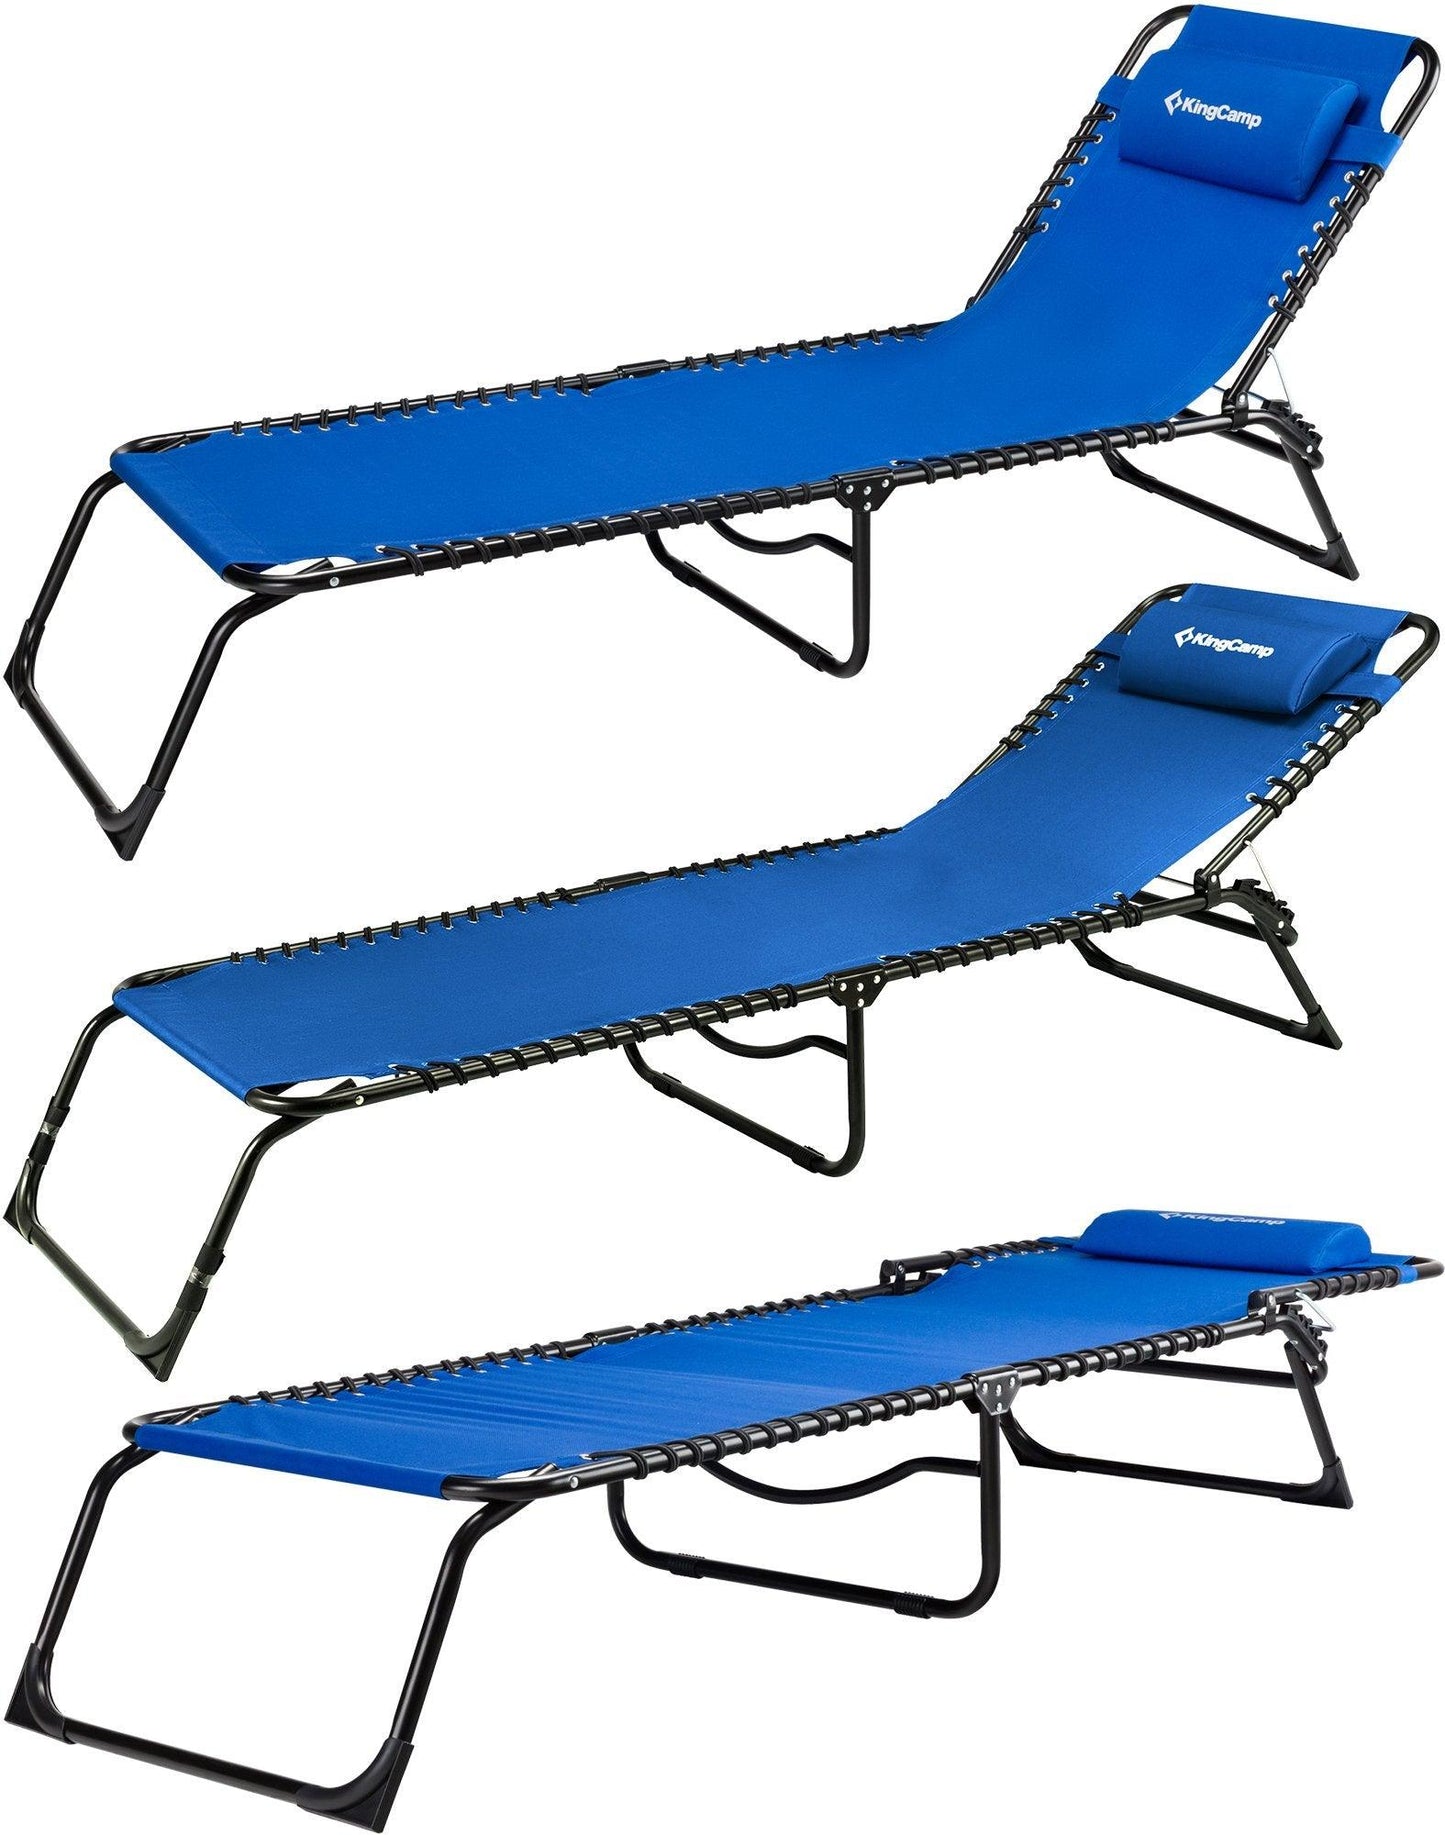 KingCamp Chaise Lounge Removable Pillow 3-Position Adjustable Chair Folding Patio Recliner for Camping Pool Beach Outdoor, Supports 300lbs, Blue, One Size - CookCave